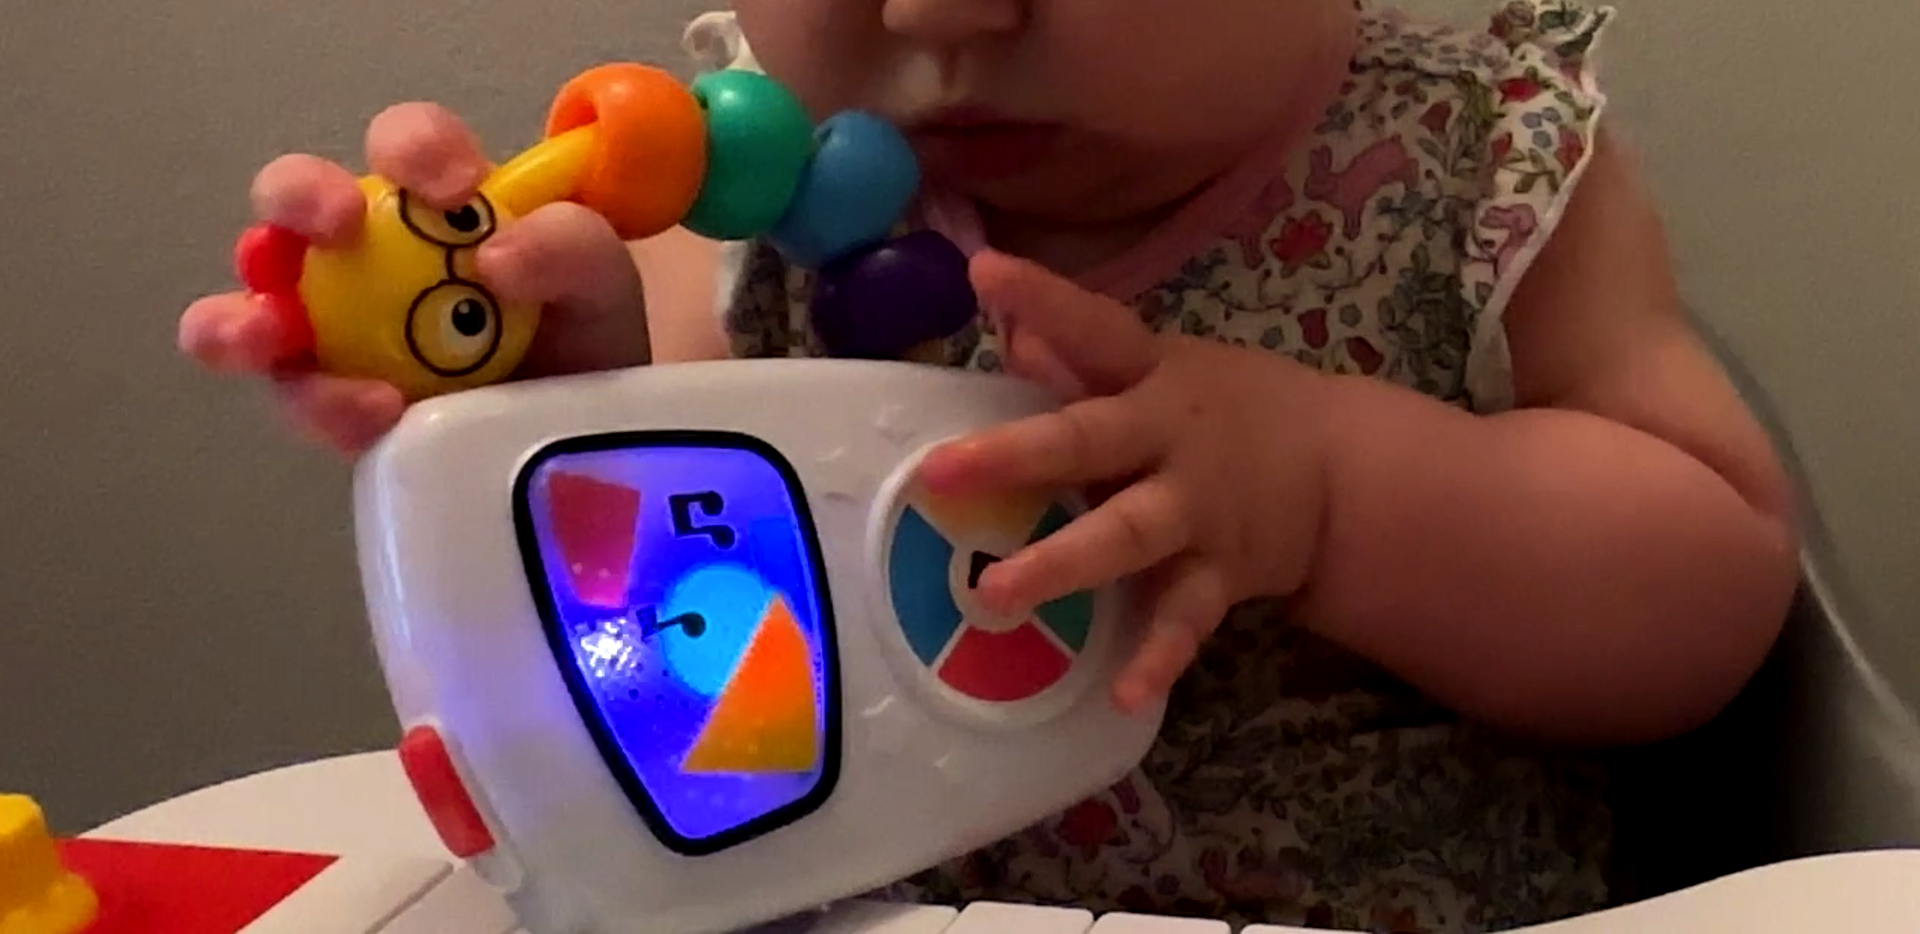 Cramming CircuitPython Into Your Baby’s Toys